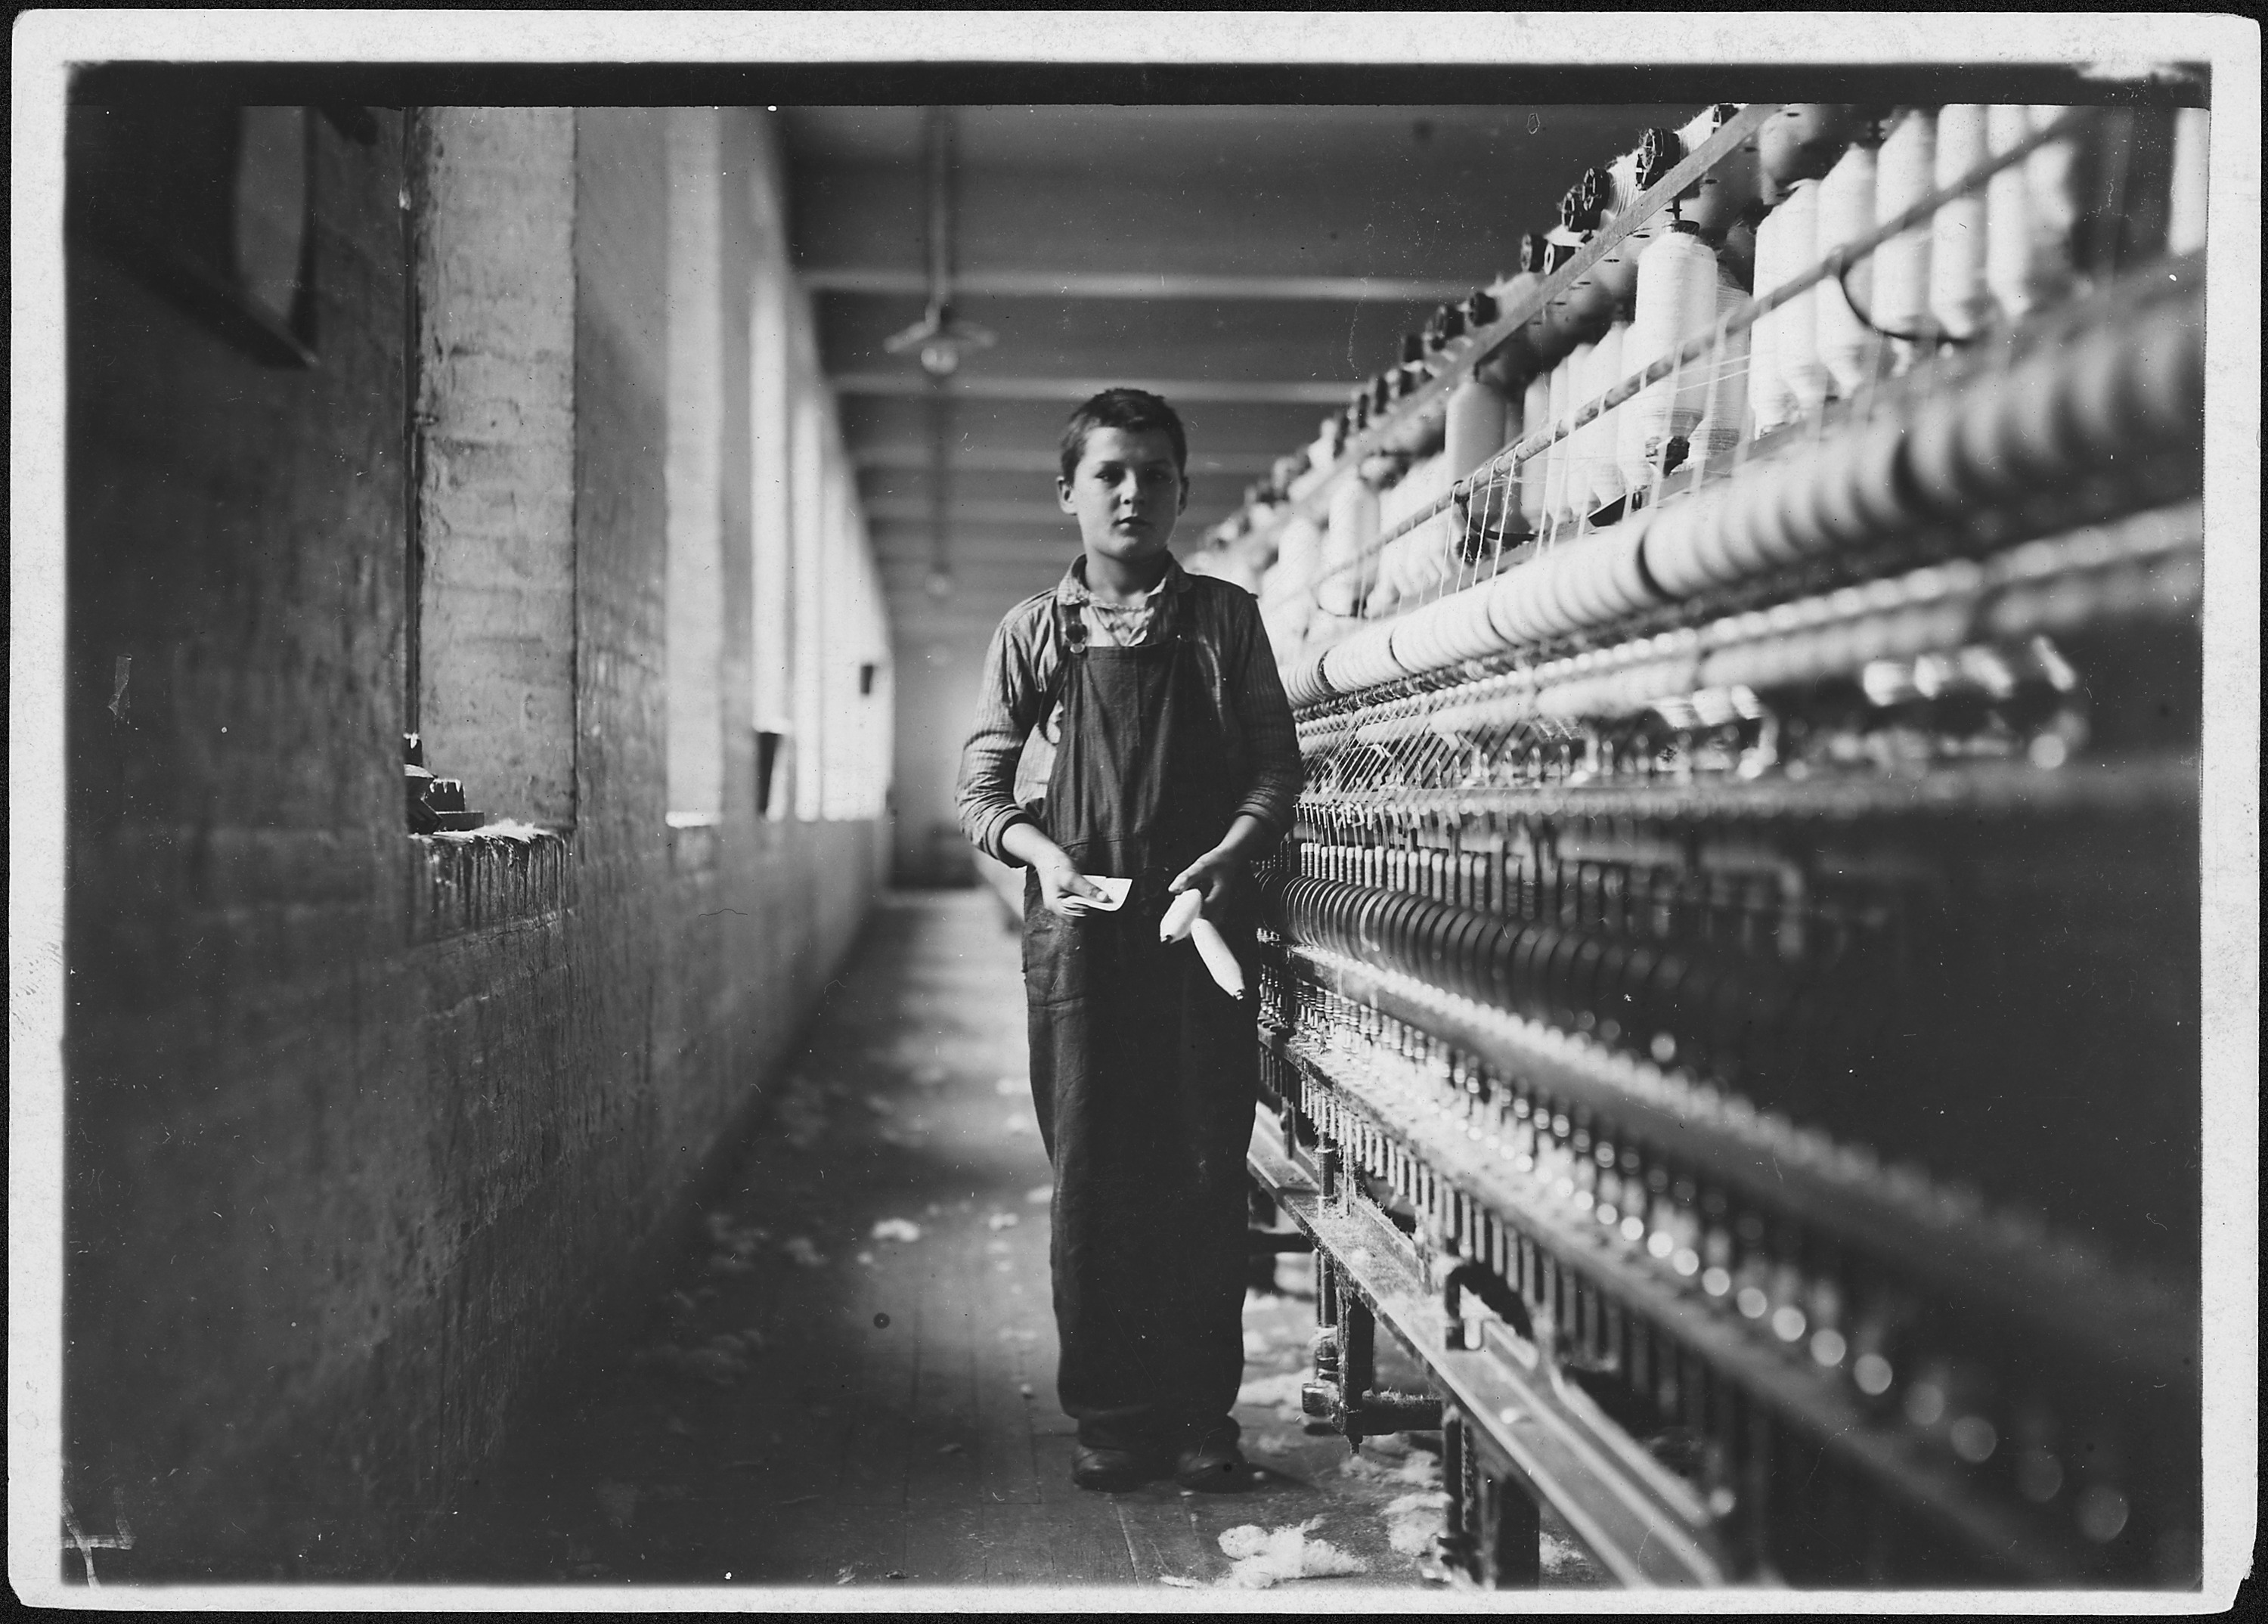 Tony Soccha, a young bobbin boy, been working there a year. Chicopee, Mass. - NARA - 523488